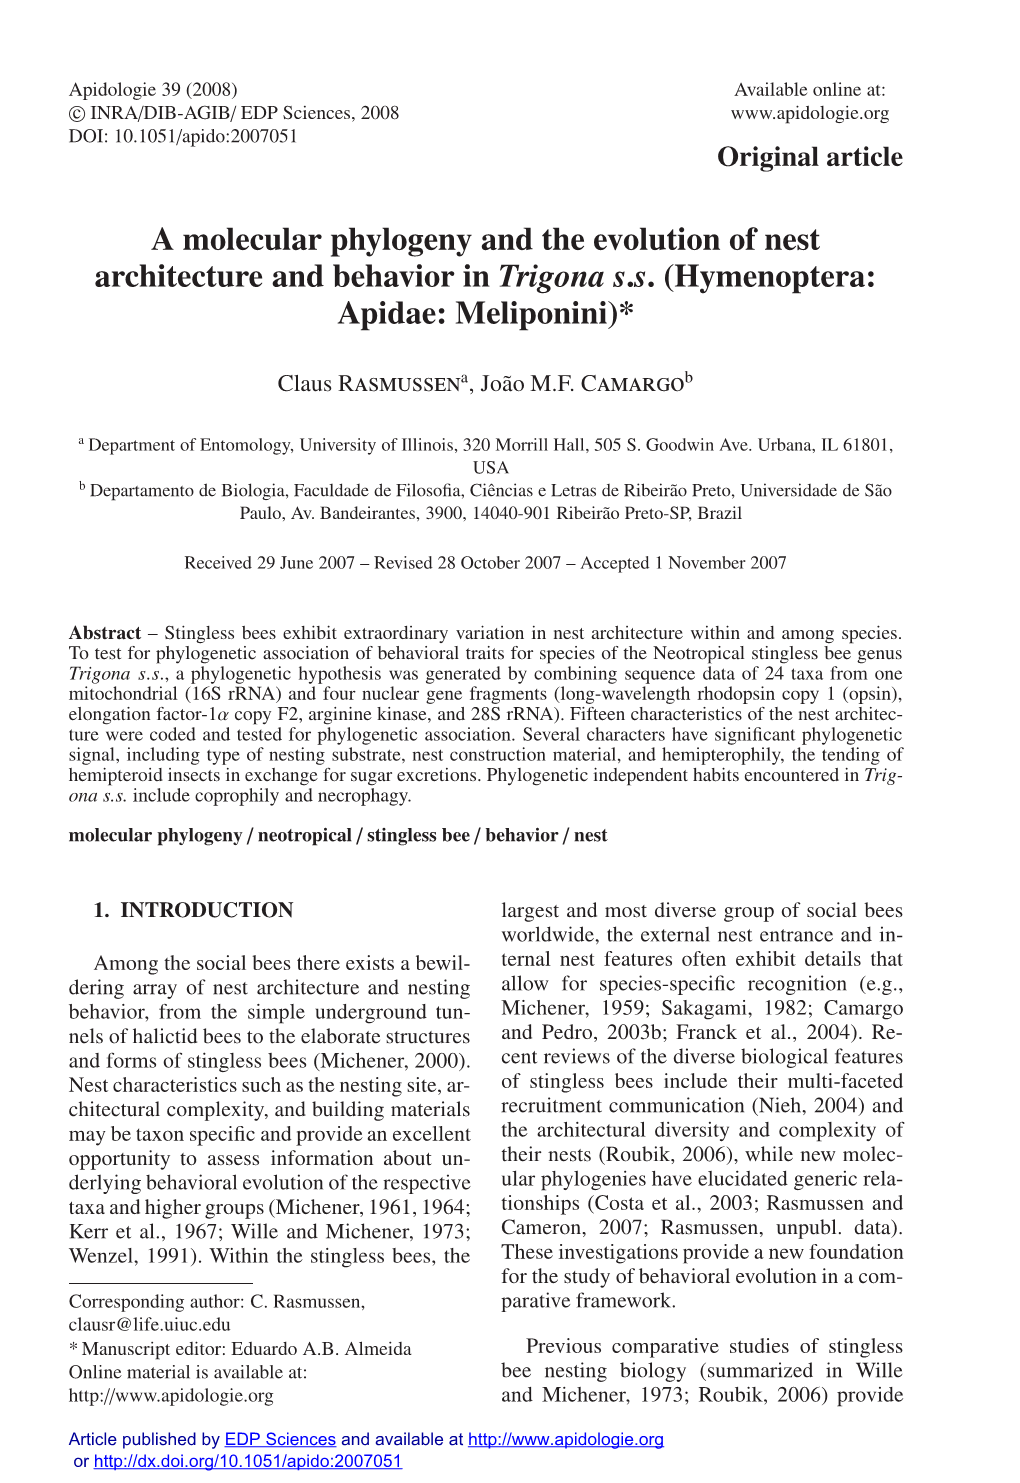 A Molecular Phylogeny and the Evolution of Nest Architecture and Behavior in Trigona S.S